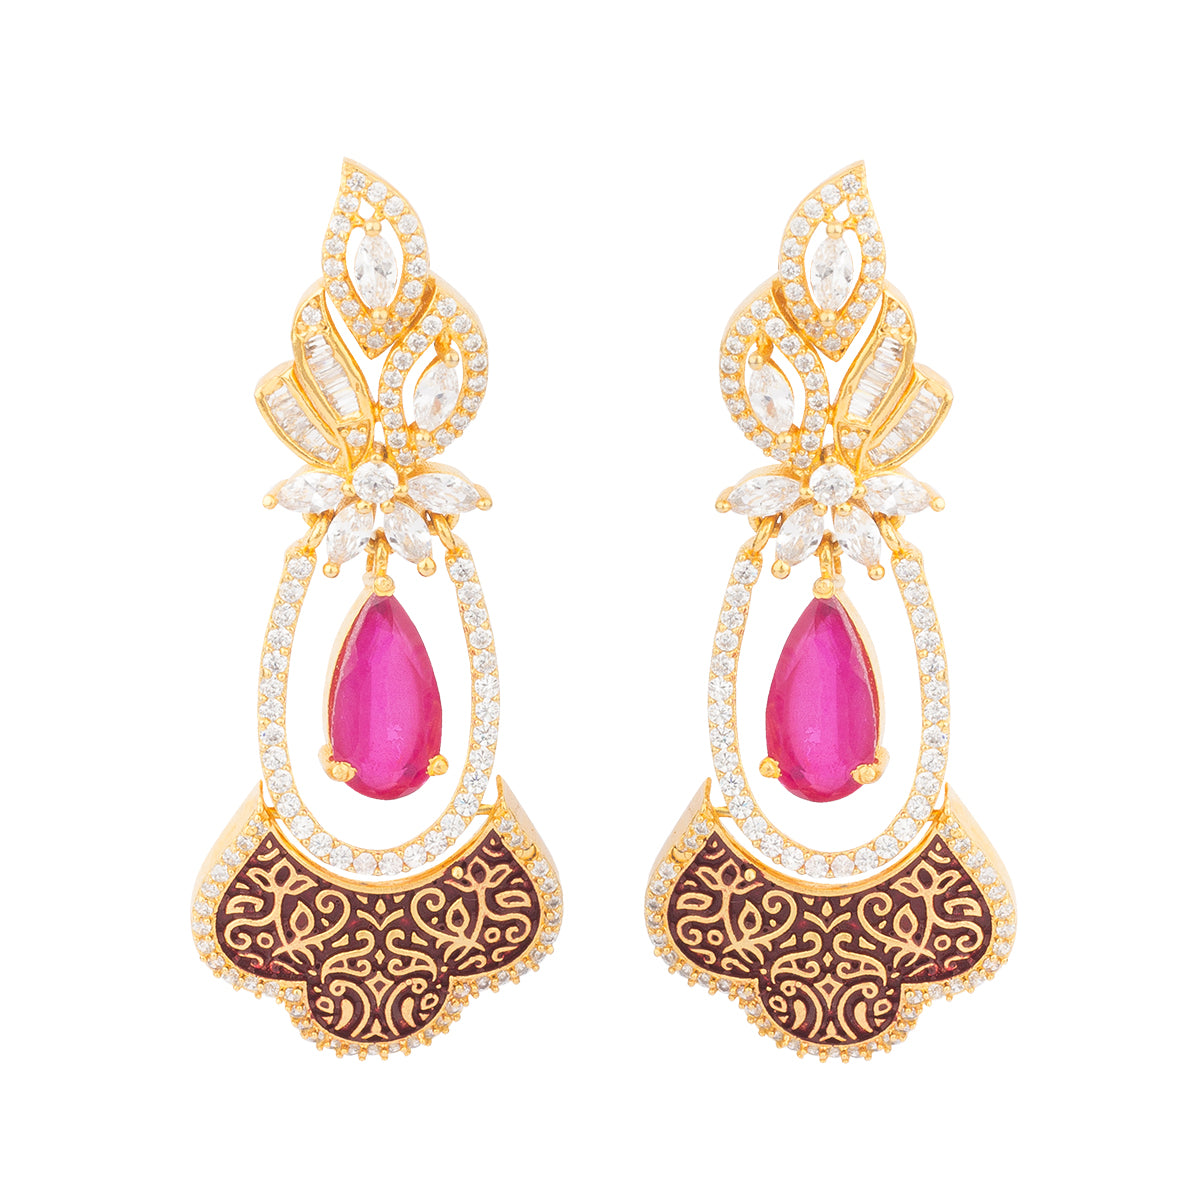 This earring is curated with shiny crystals, red tear drop shapped stone in the middle and beautiful design at the bottom.